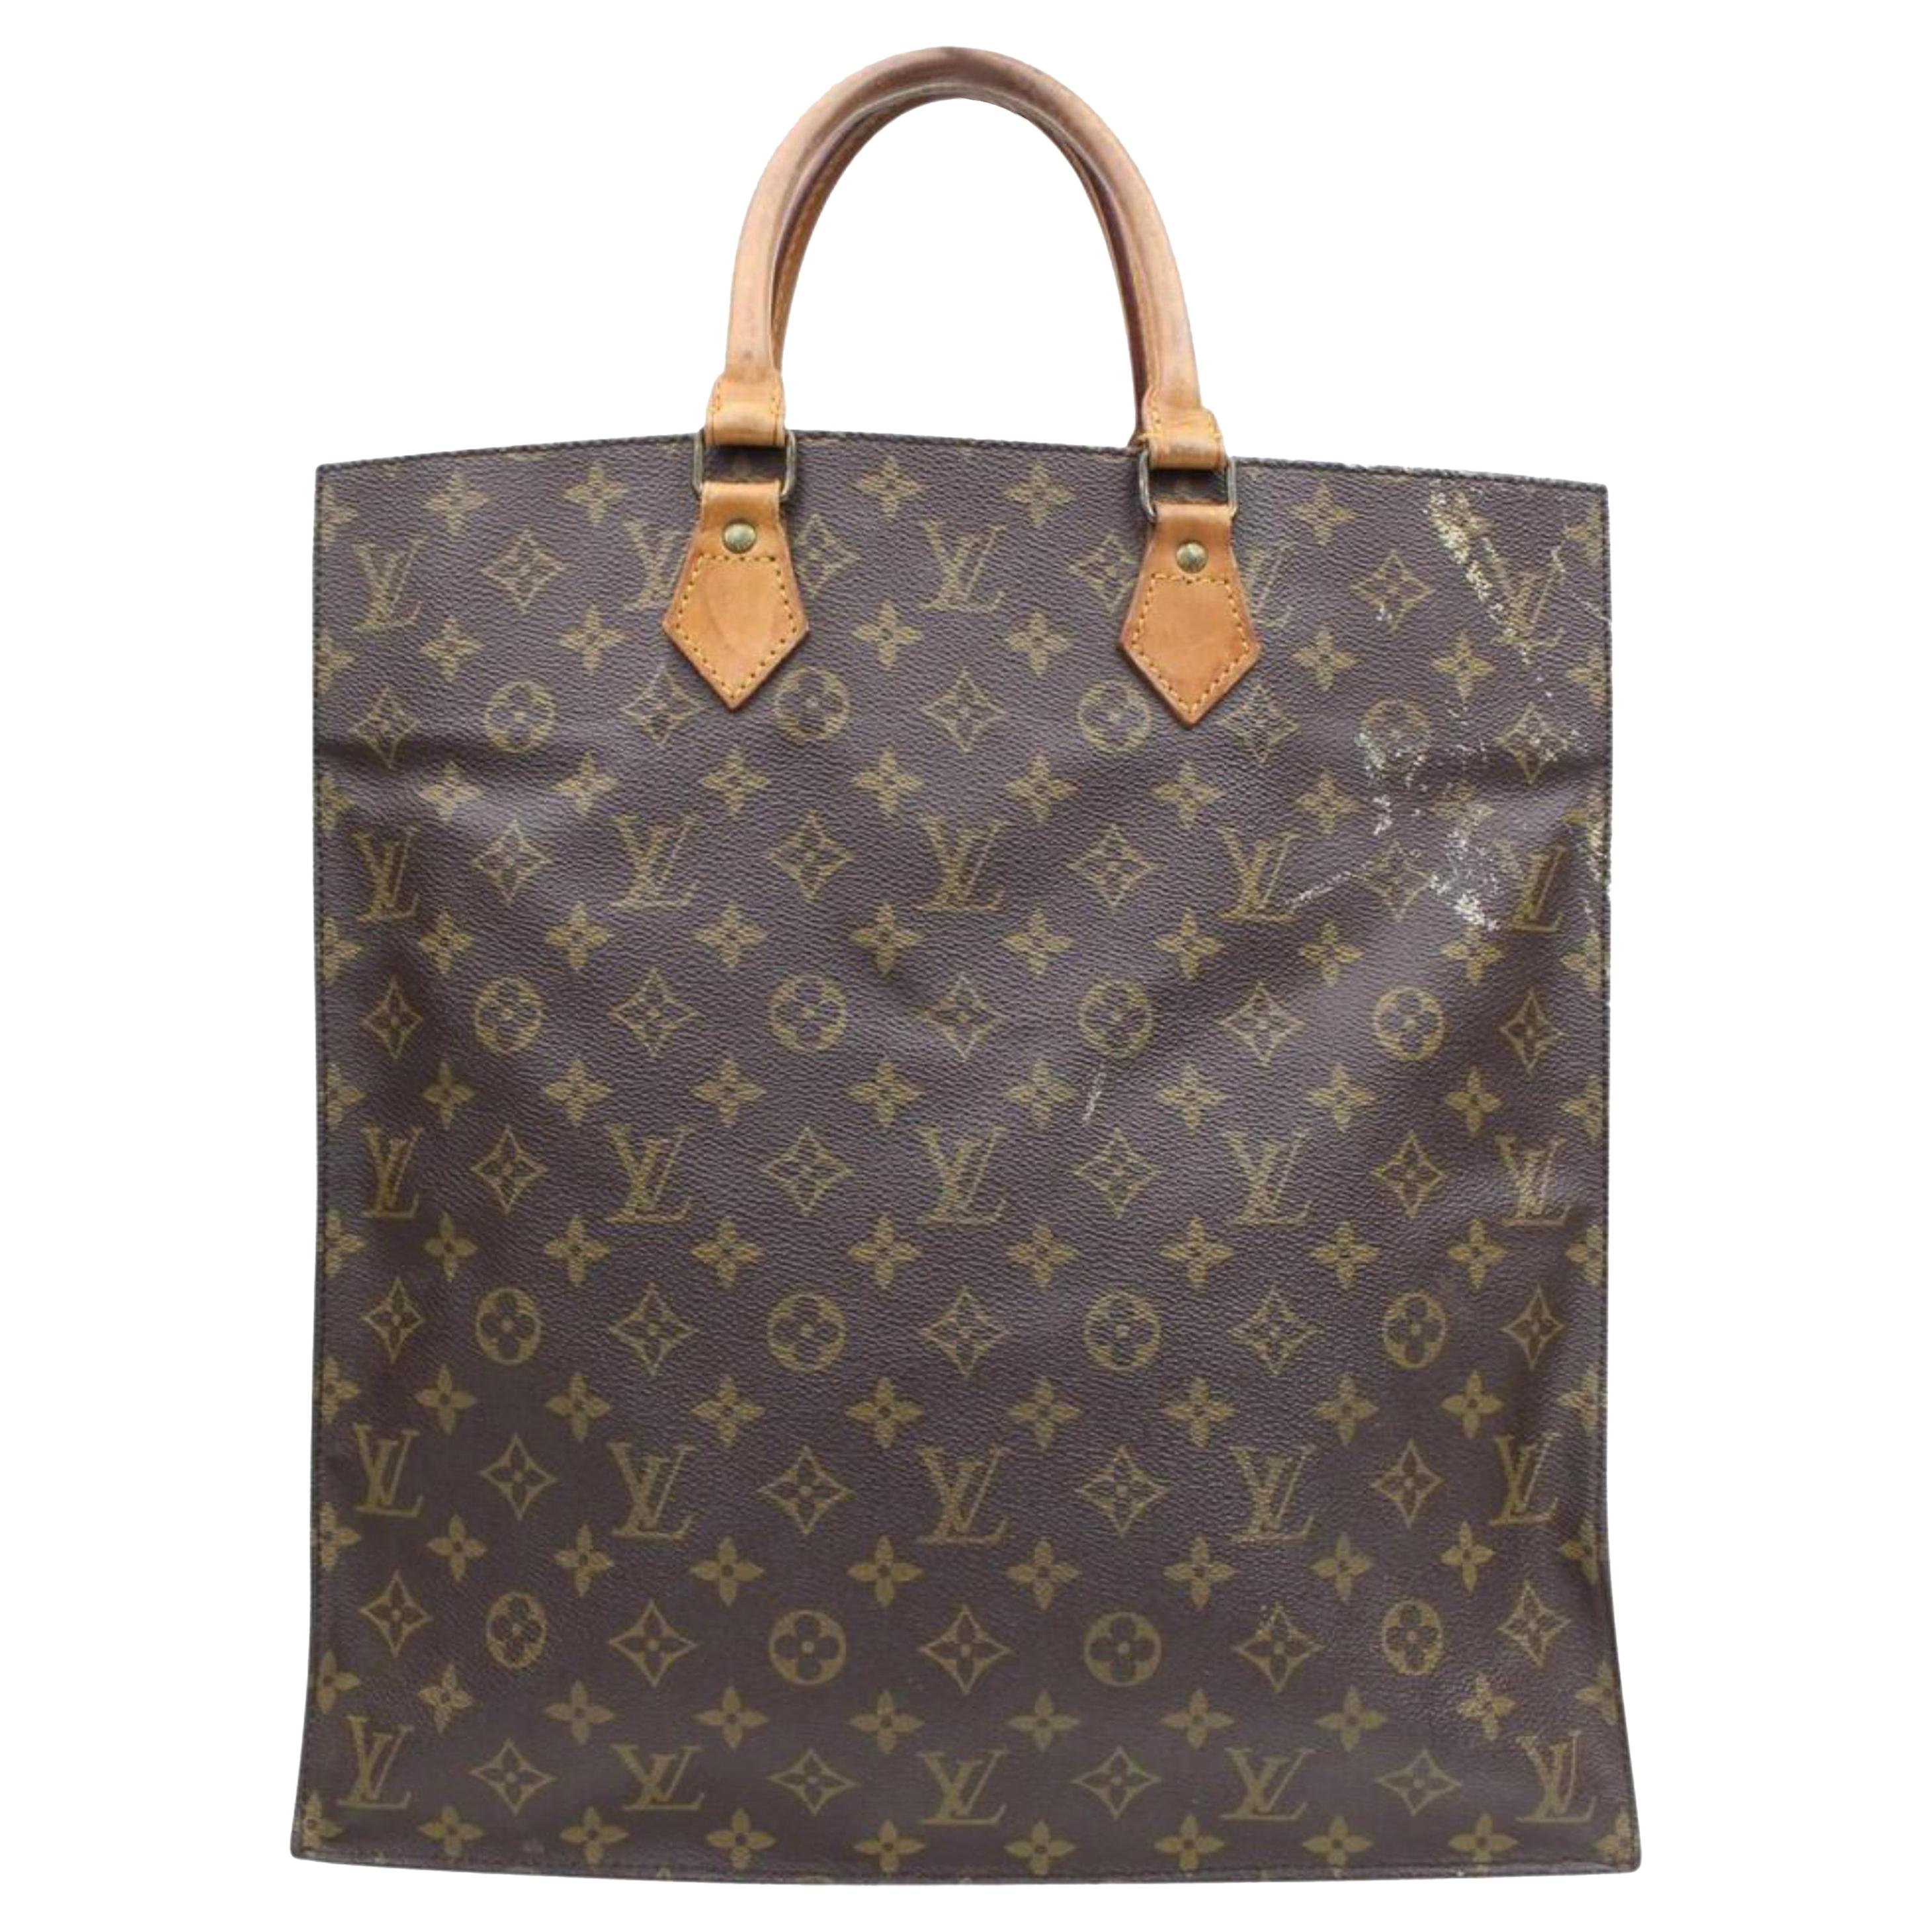 Louis Vuitton Sac Plat Monogram 868094 Brown Coated Canvas Tote For Sale